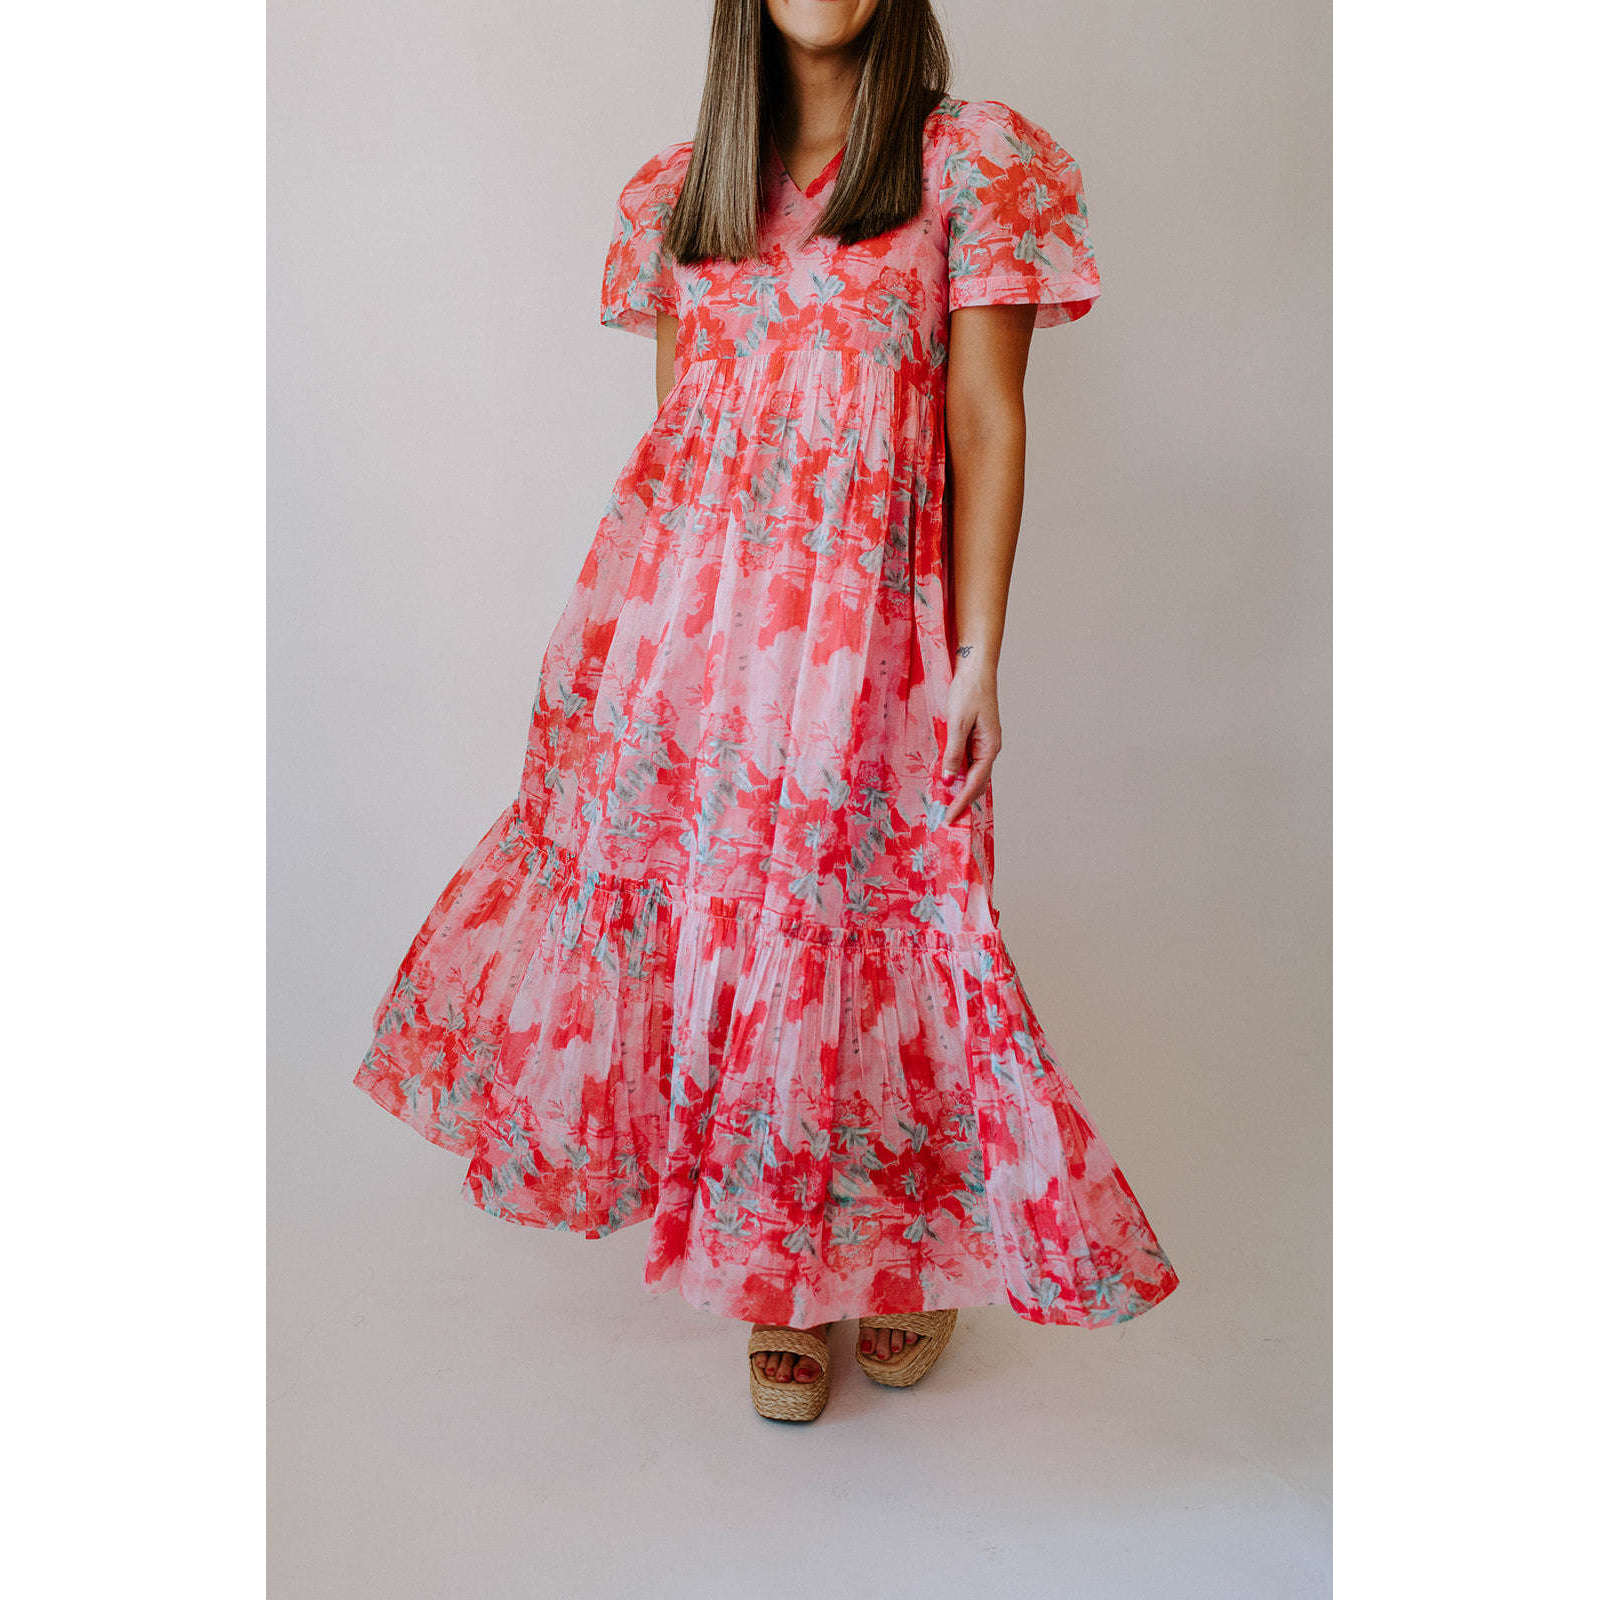 8.28 Boutique:WKND WYFR,WKND WYFR Sunset Dress in Pink and Red,Dress